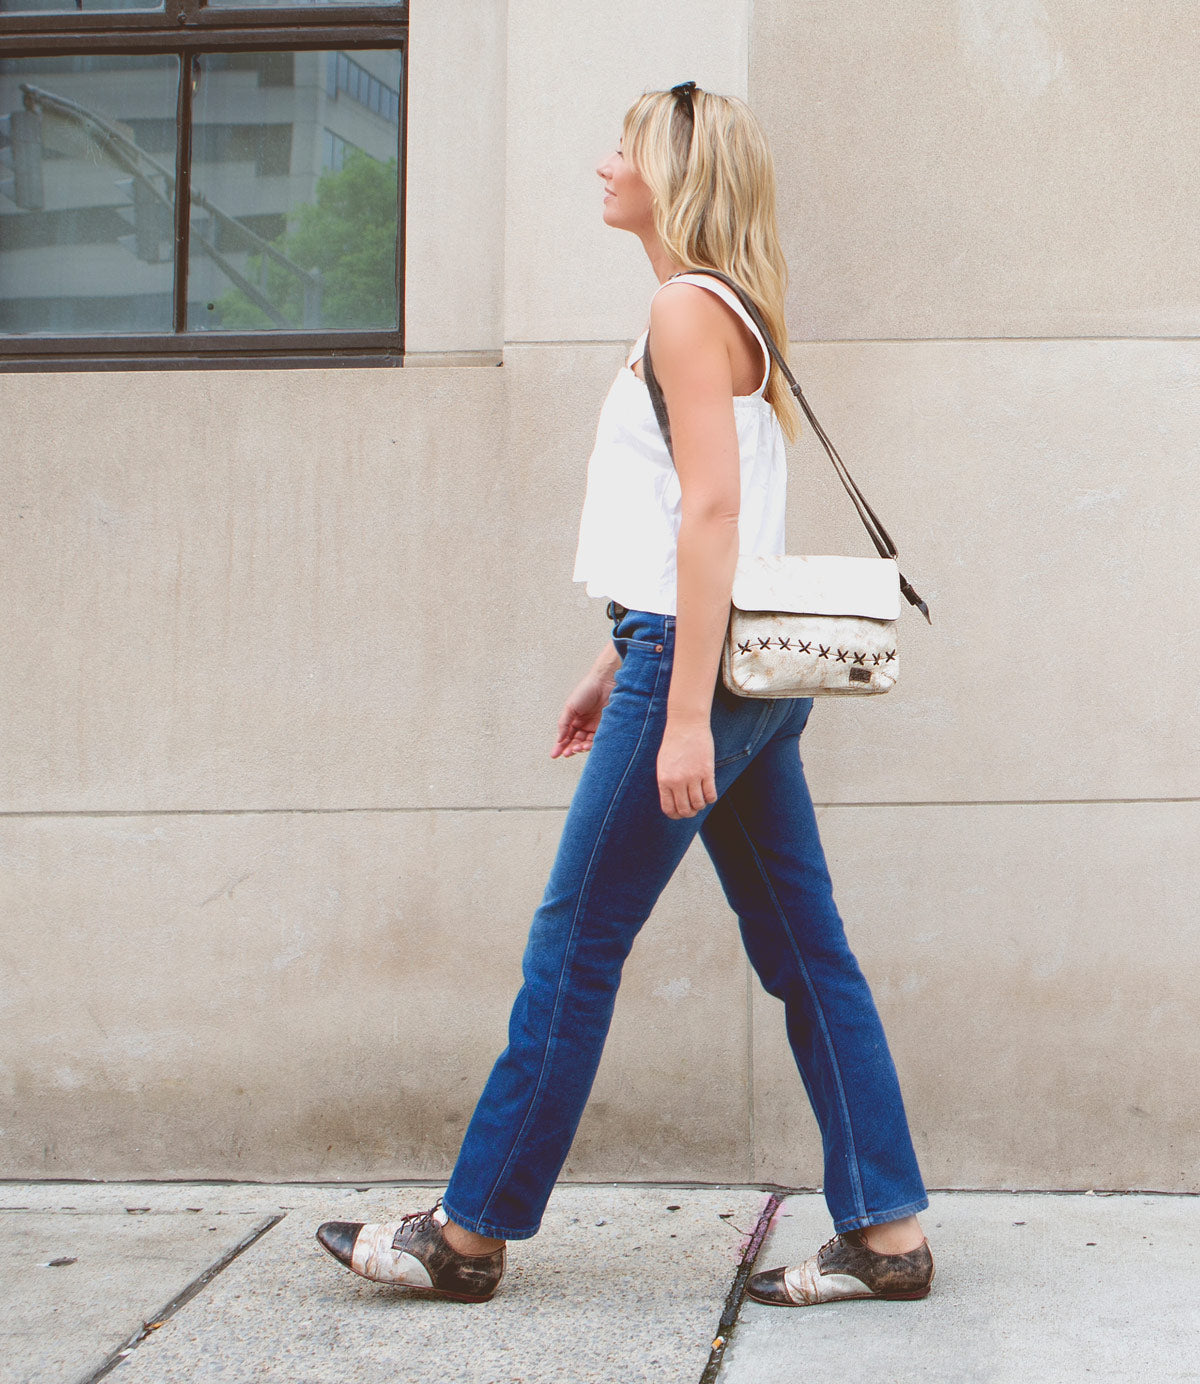 A person in blue jeans, a white top, and sandals walks on a sidewalk past a building with a window. They carry a Rumba II by Bed Stu, featuring buttery soft leather that adds an element of luxury to their casual ensemble.